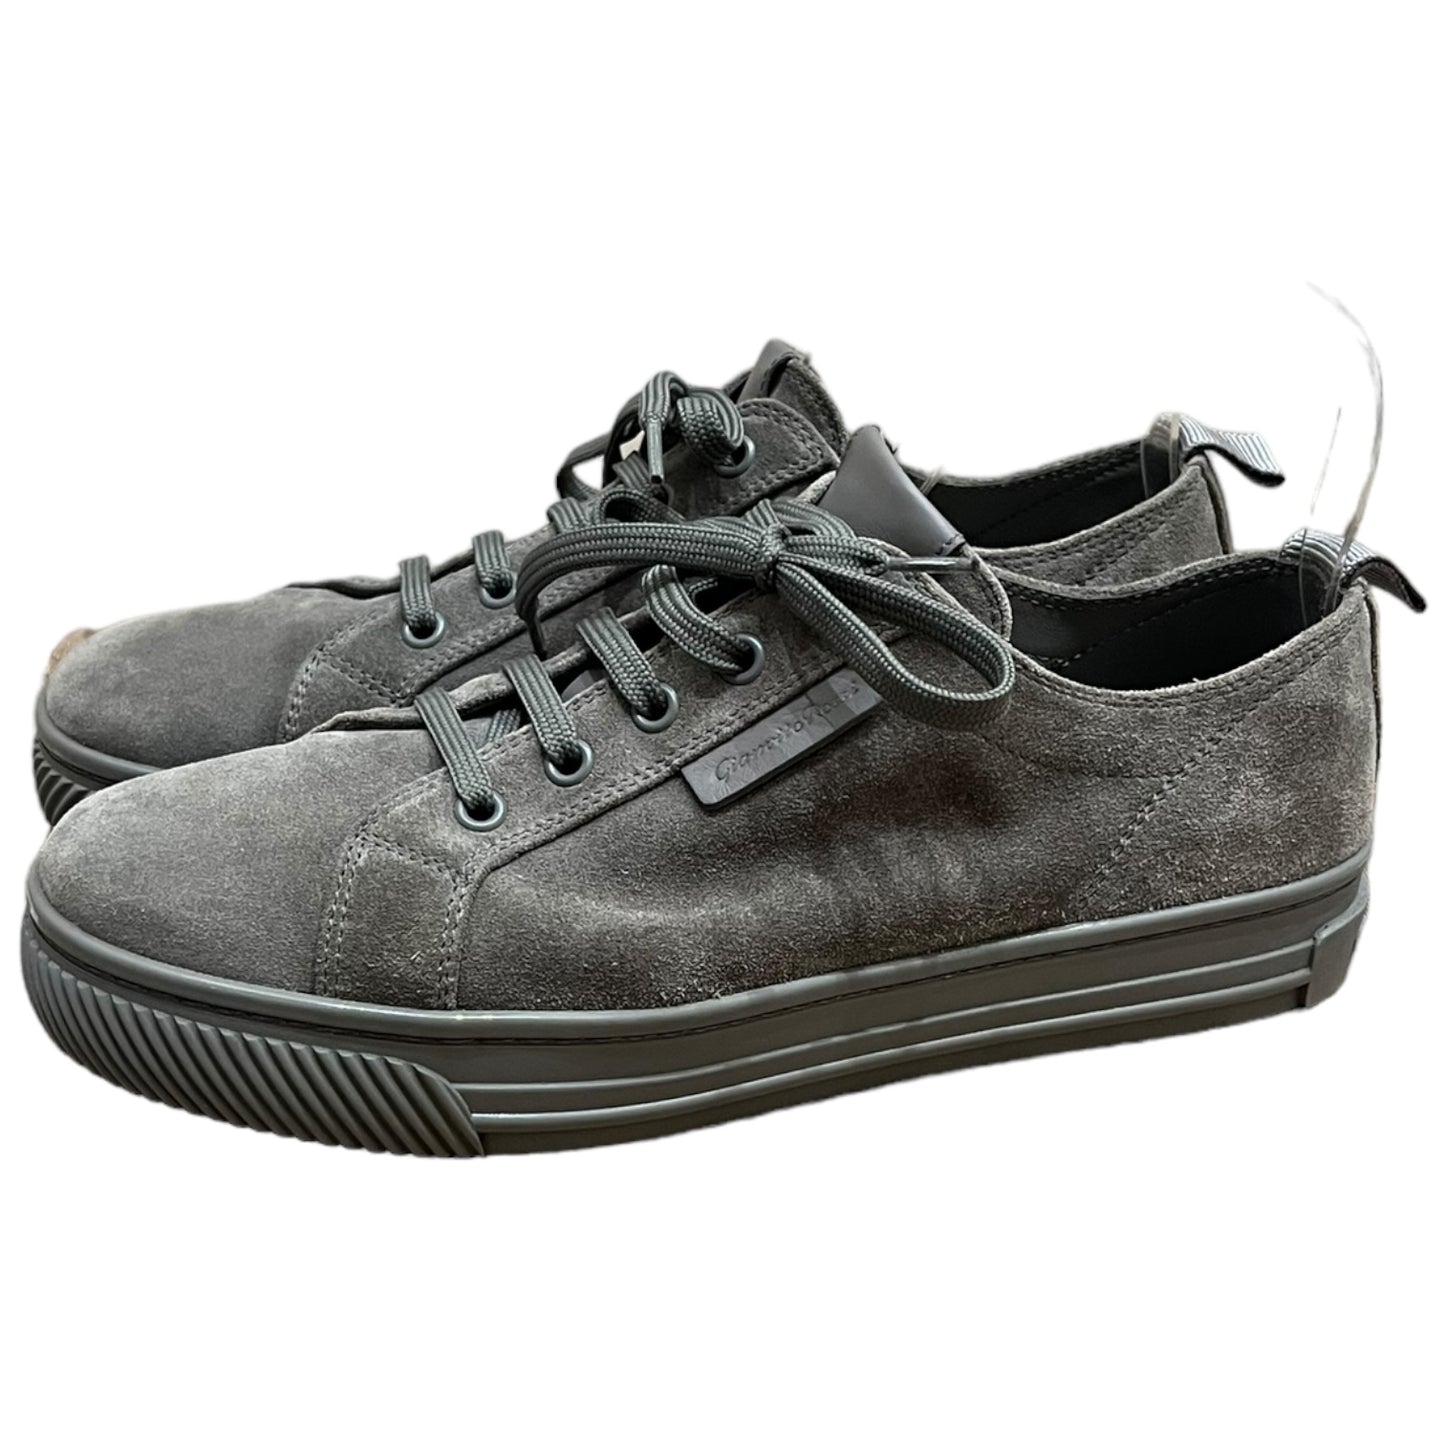 Gianvito Rossi Grey Suede Trainers